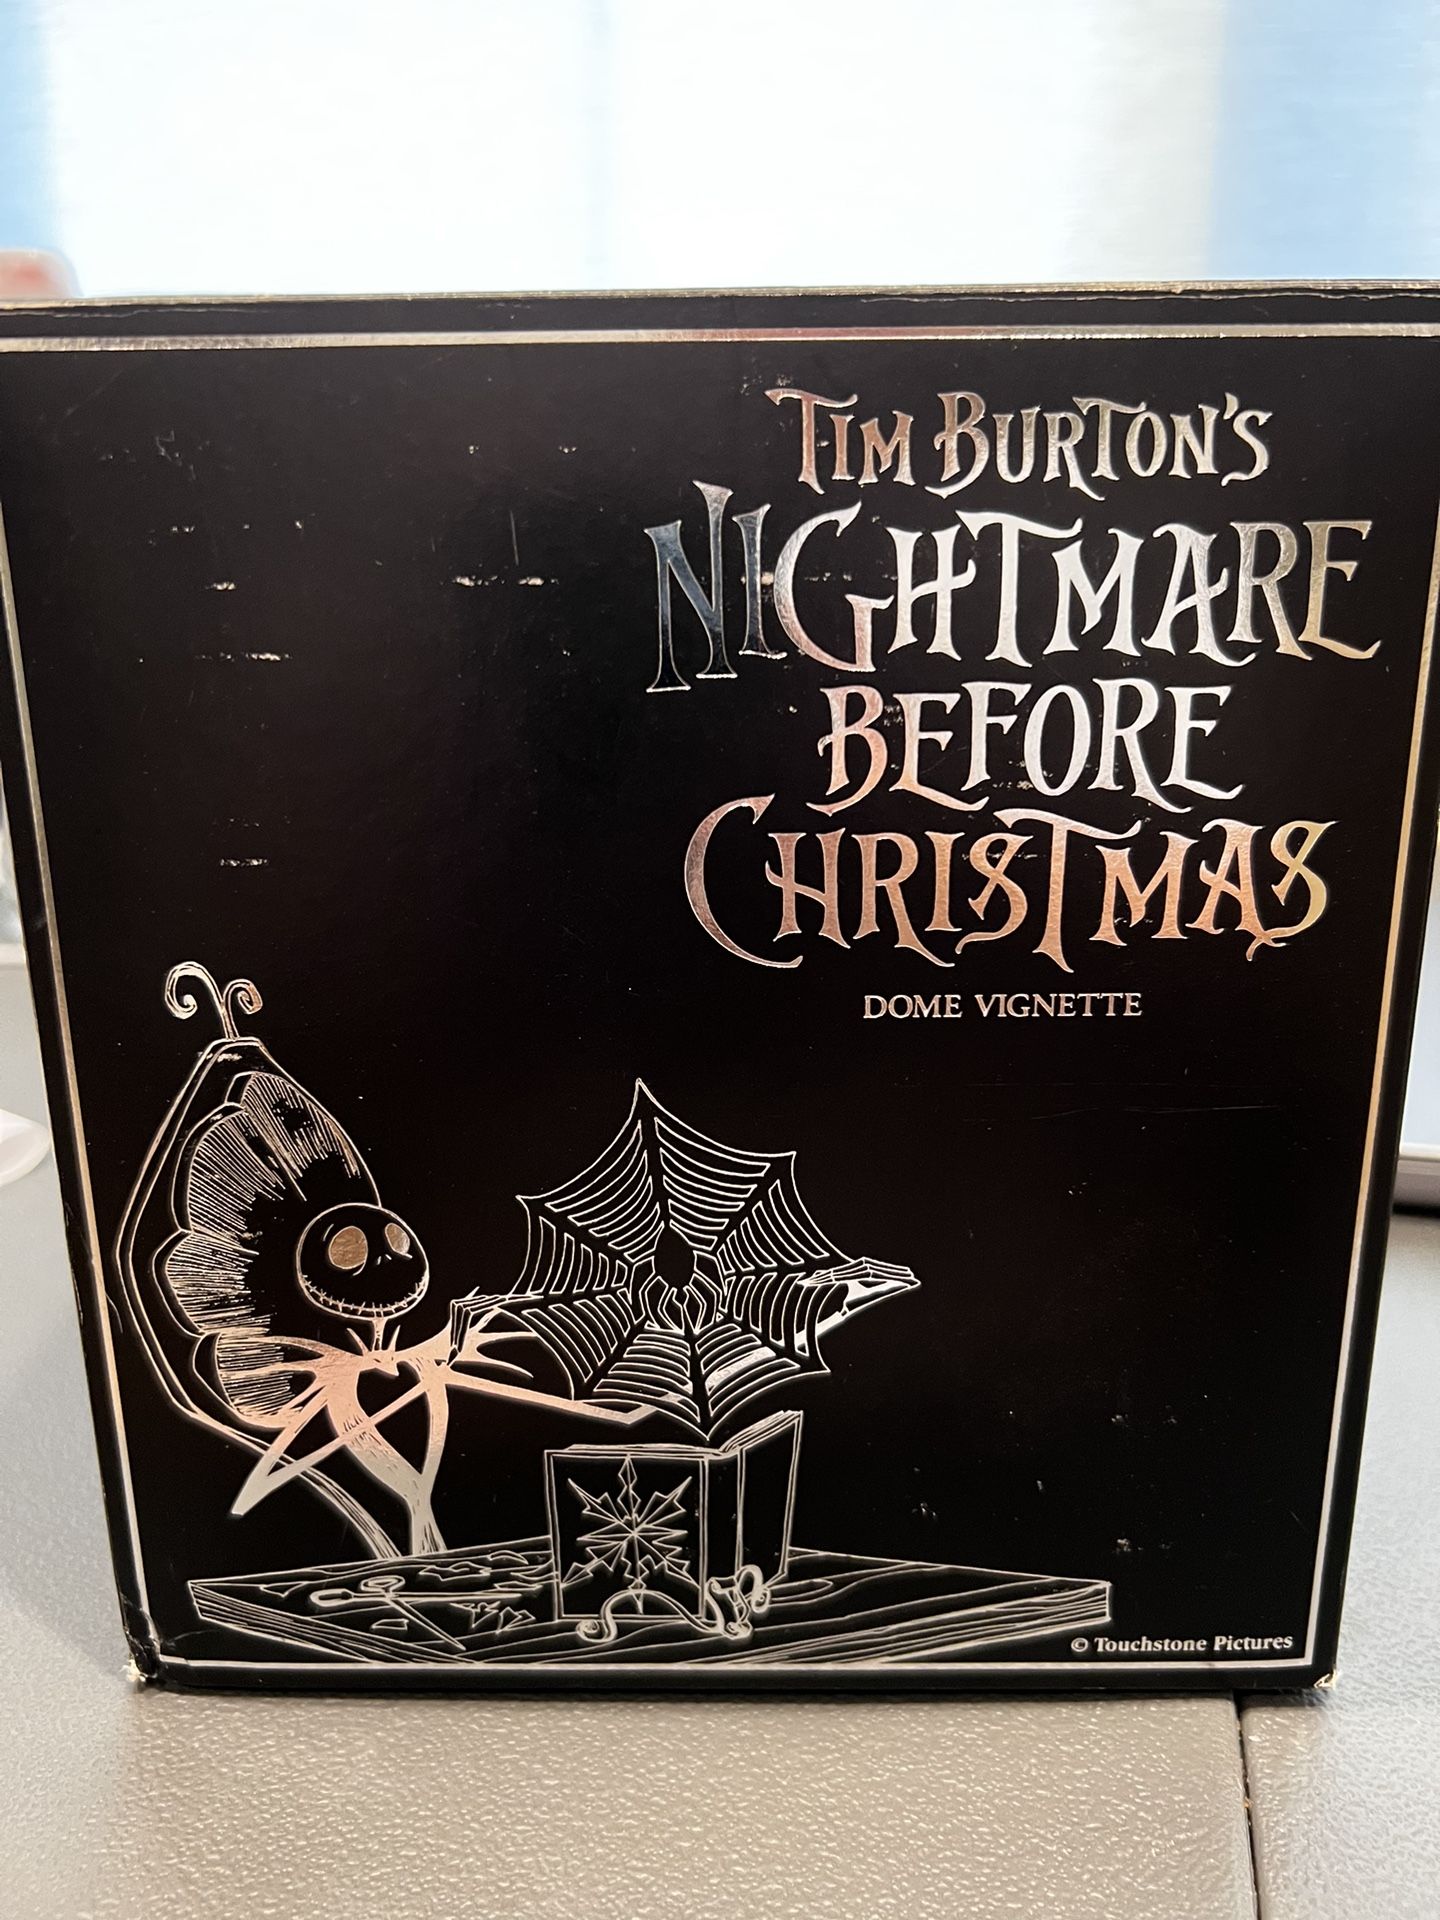 Dome Vignette Nightmare Before Christmas